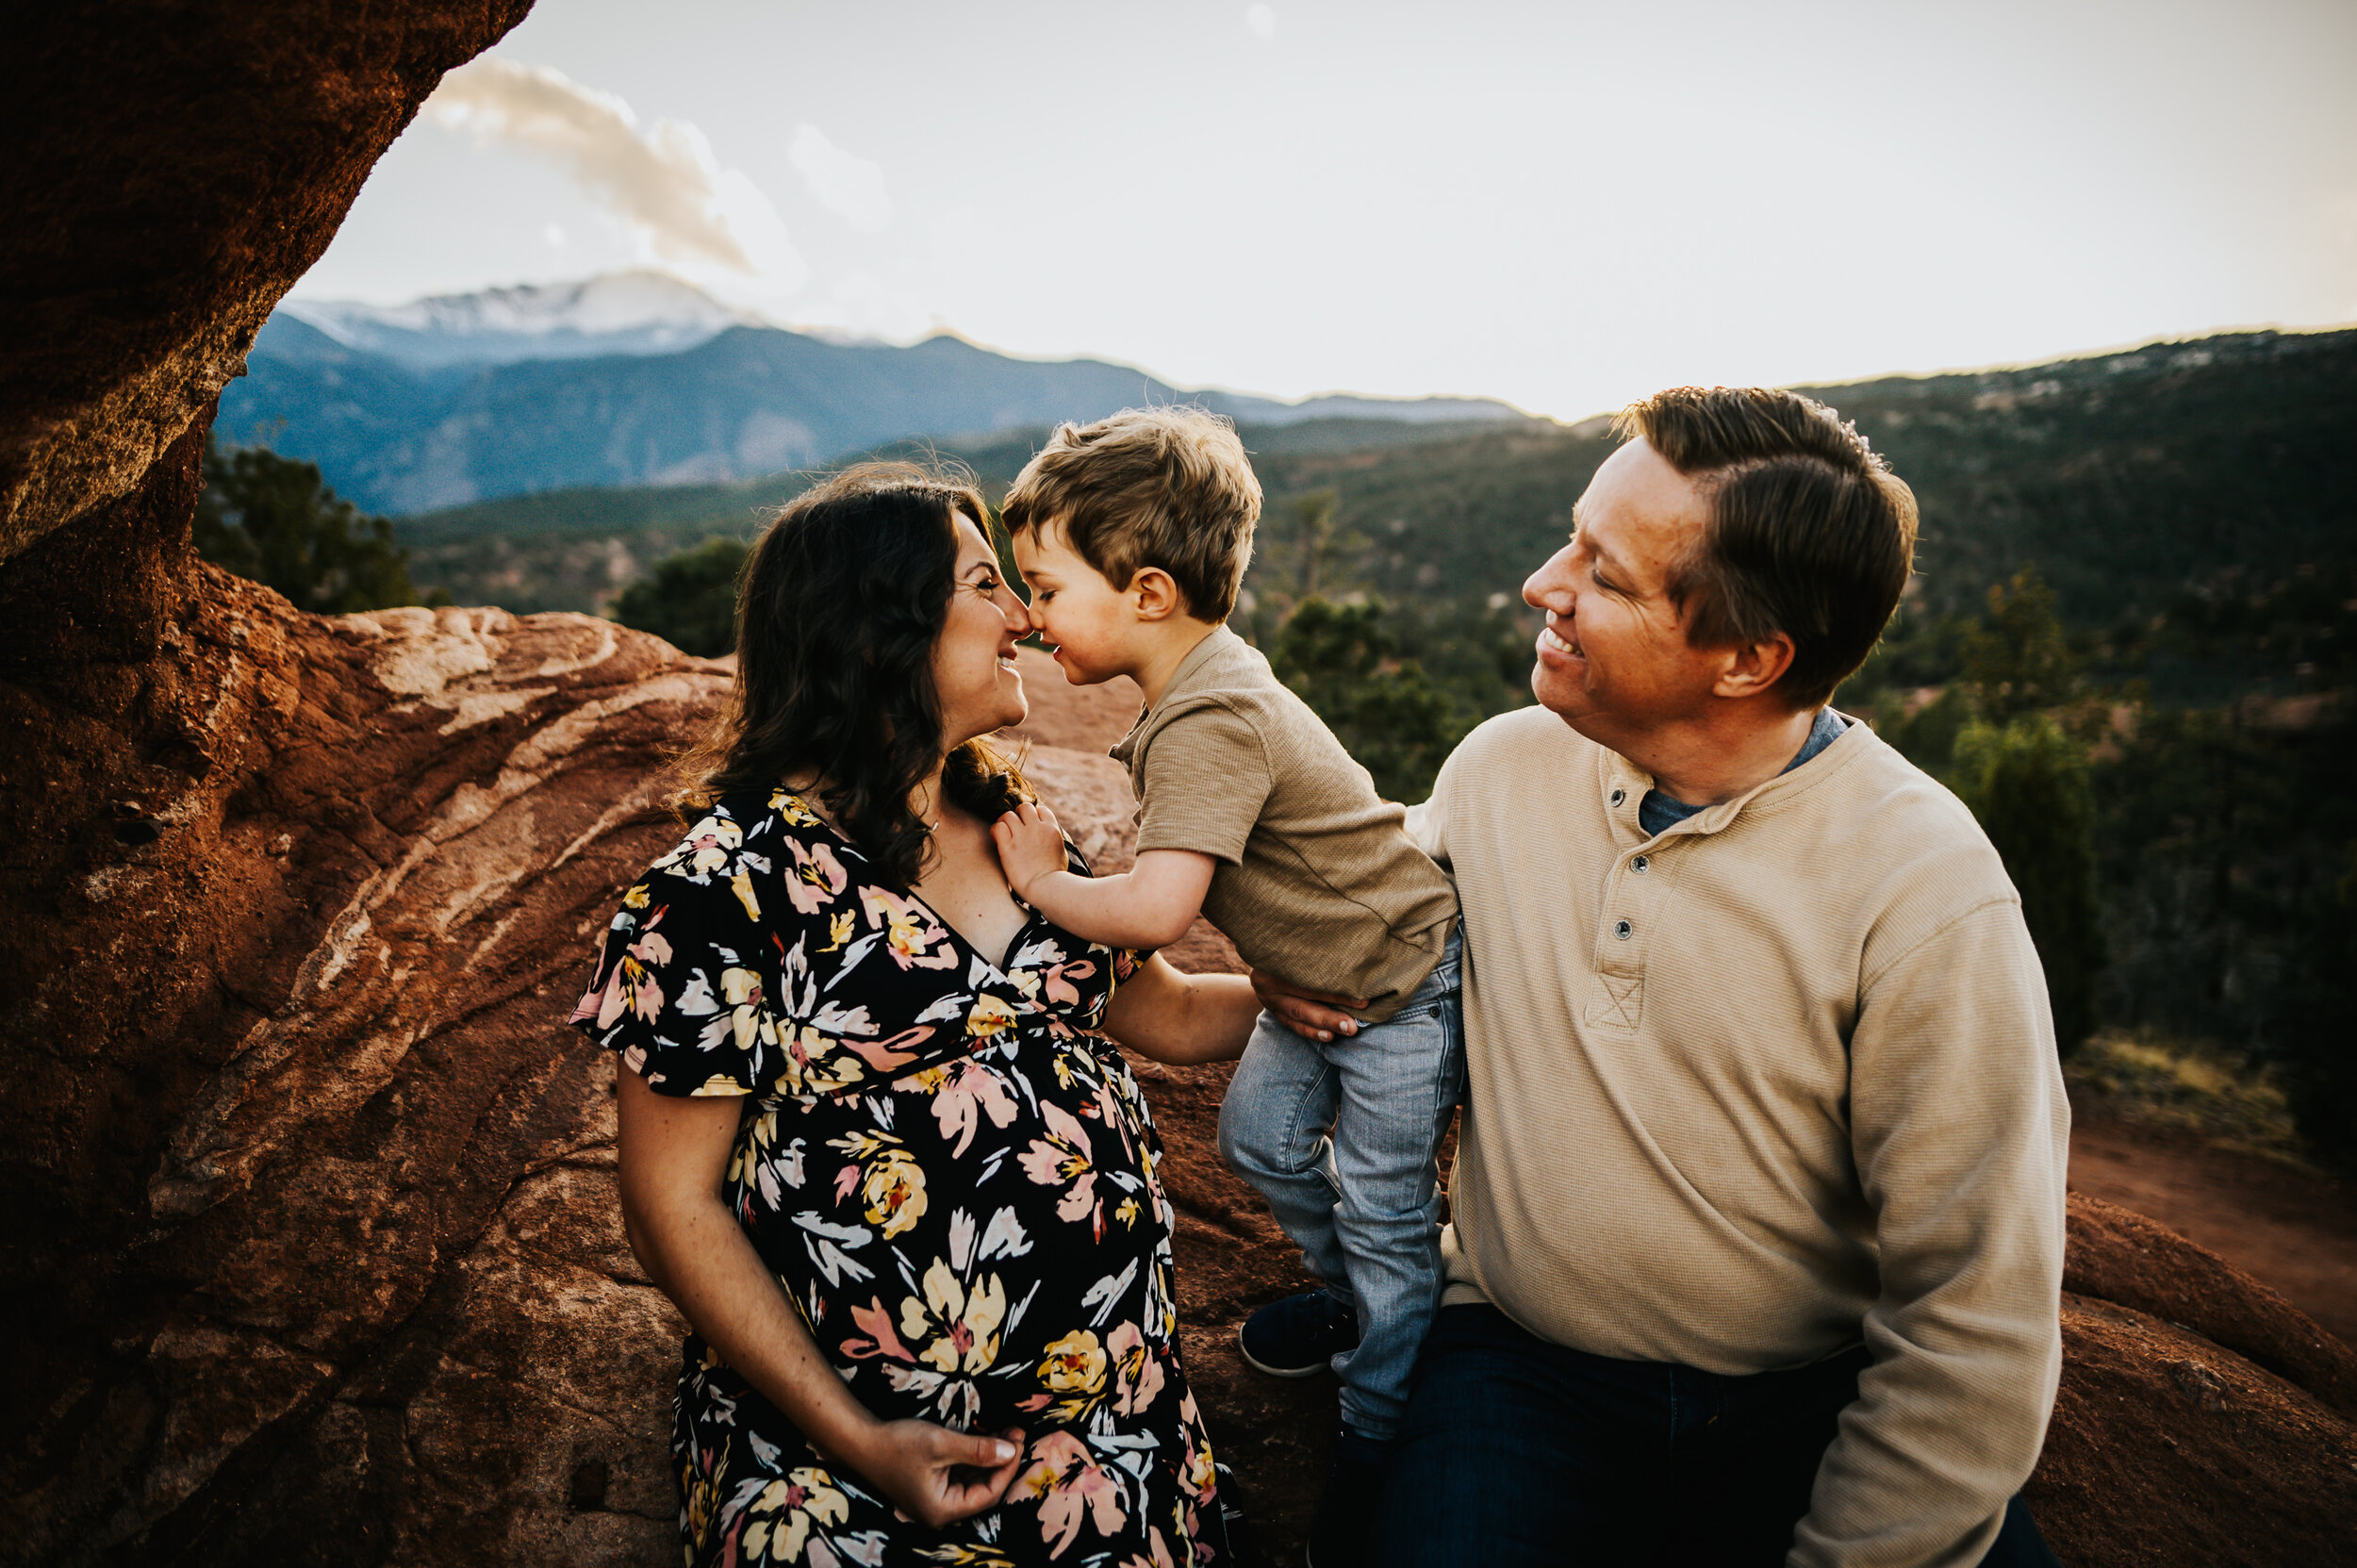 Andrea Grimm Maternity Family Session Colorado Springs Sunset Garden of the Gods Wild Prairie Photography-18-2020.jpg